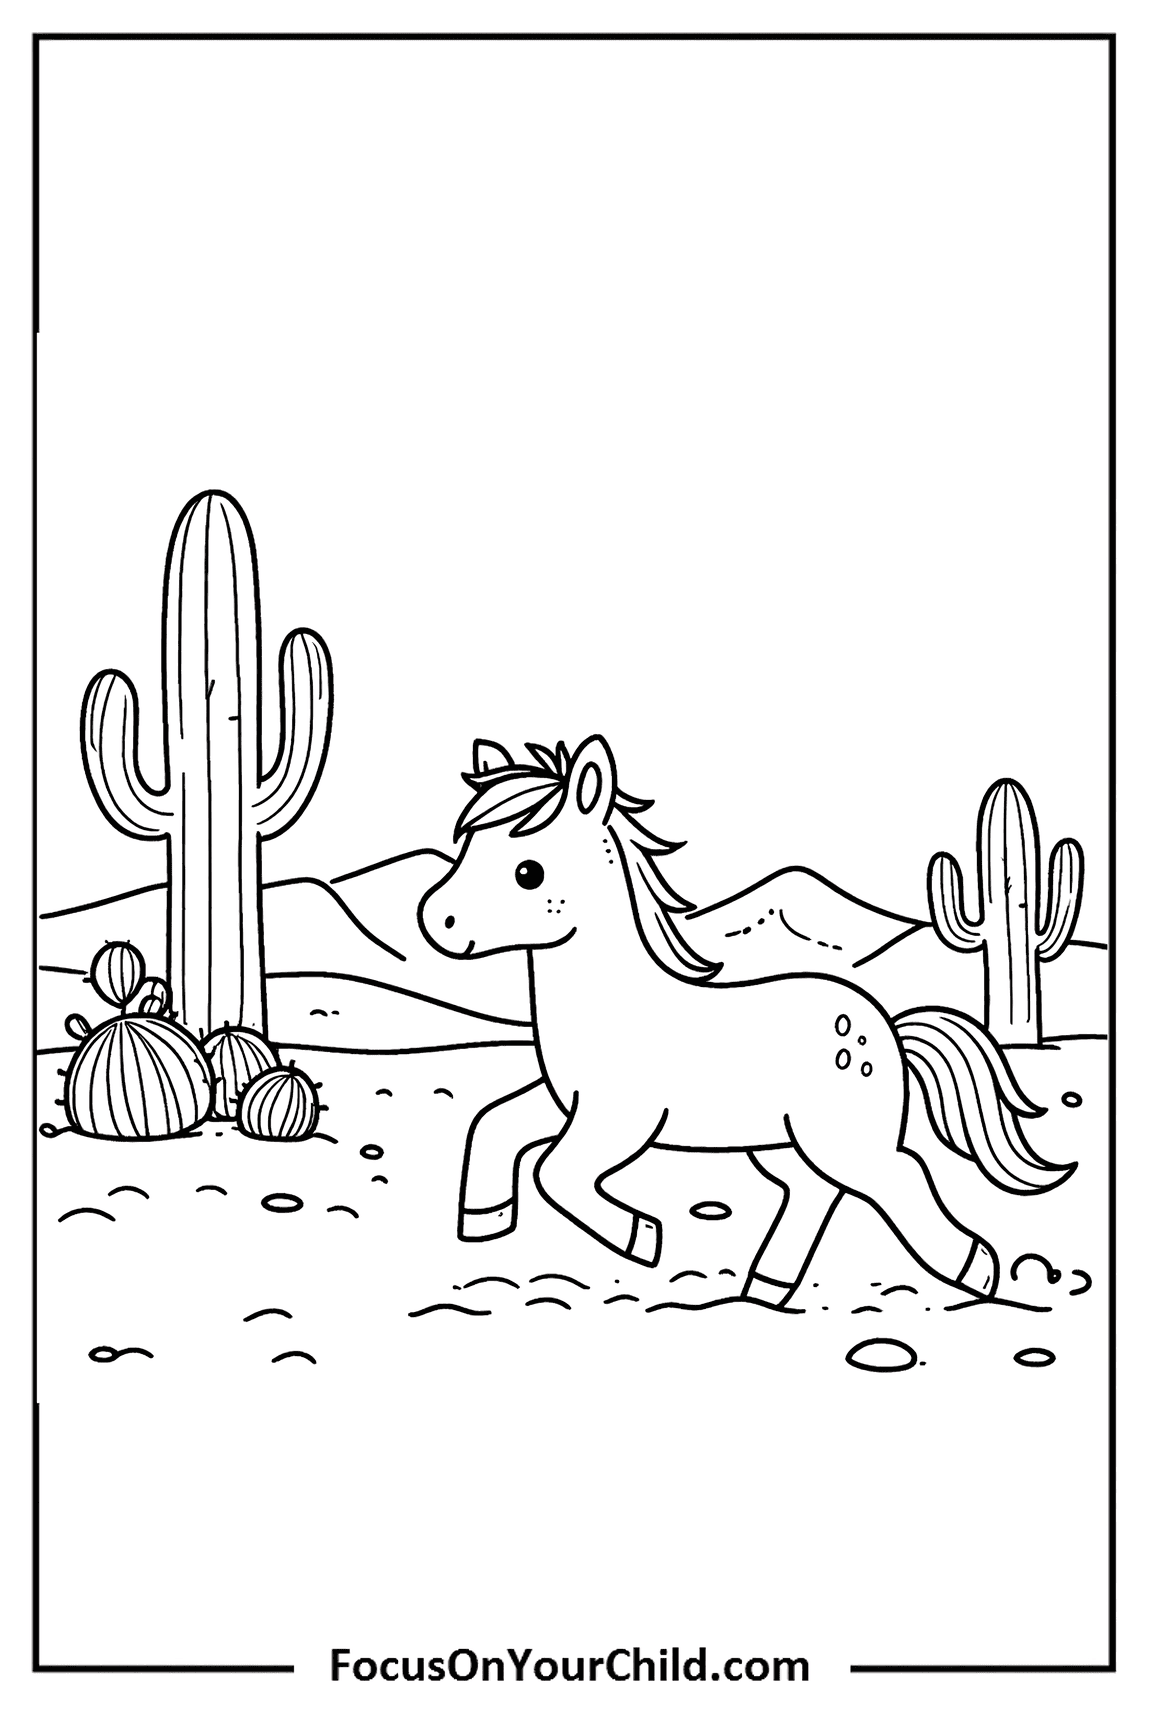 Cheerful cartoon horse trotting in desert landscape, perfect for coloring.